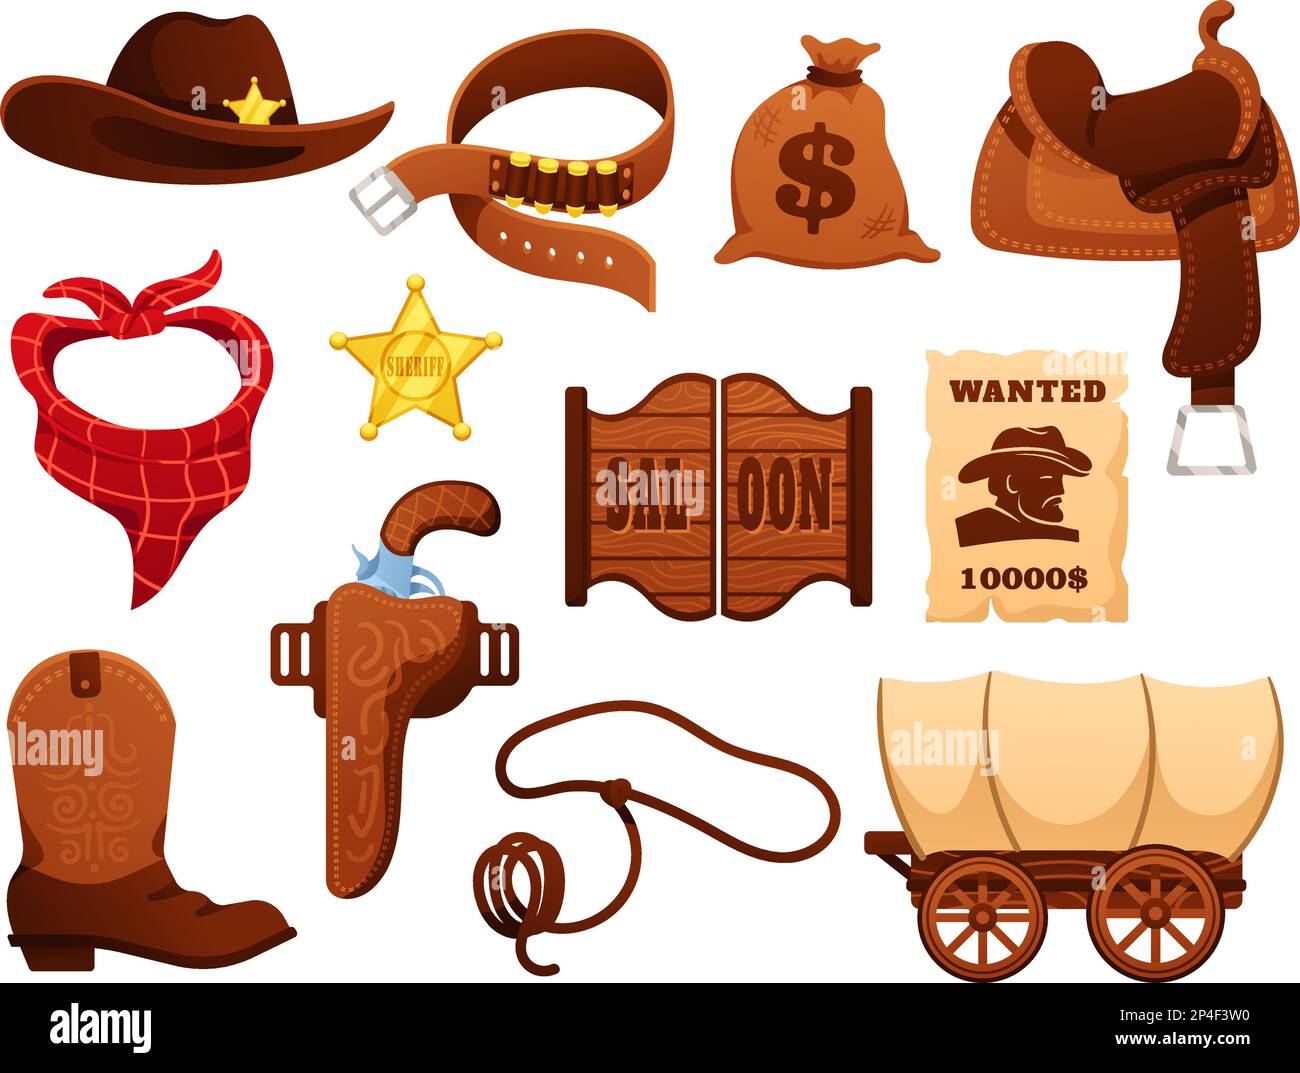 Cartoon wild west sheriff elements. Saloon doors, saddle and wagon. Wanted for reward, hat and leather cowboy boots vector illustration set Stock Vector